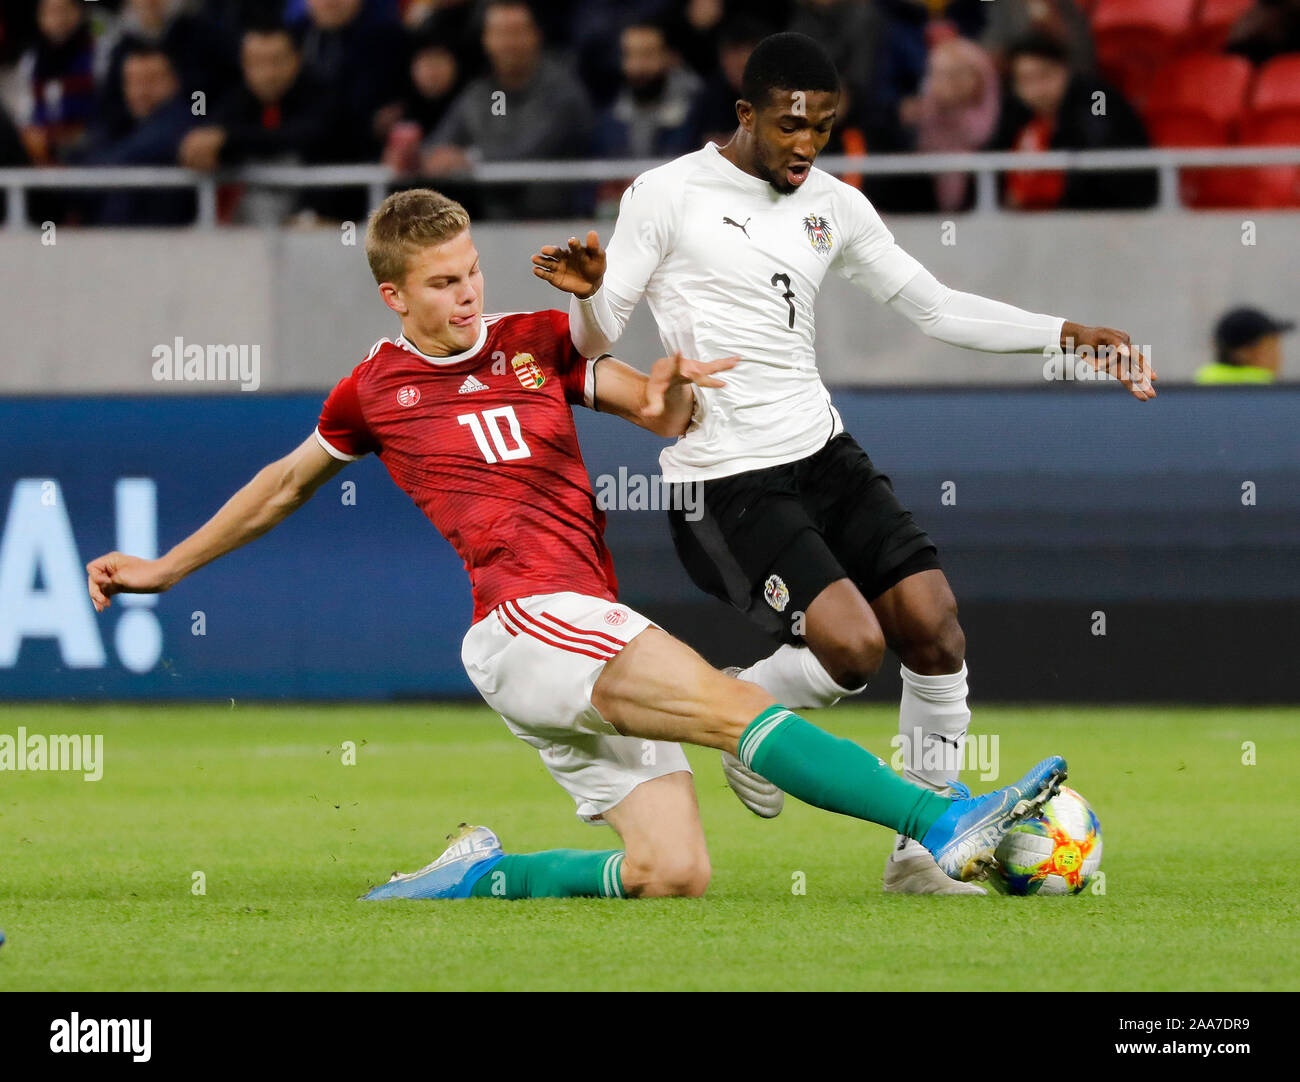 BUDAPEST, HUNGARY - NOVEMBER 18: (l-r) Andras Schafer of Hungary U21 challenges Kelvin Arase of Austria U21 during the International Friendly match between Hungary U21 and Austria U21 at Puskas Arena on November 18, 2019 in Budapest, Hungary. Stock Photo